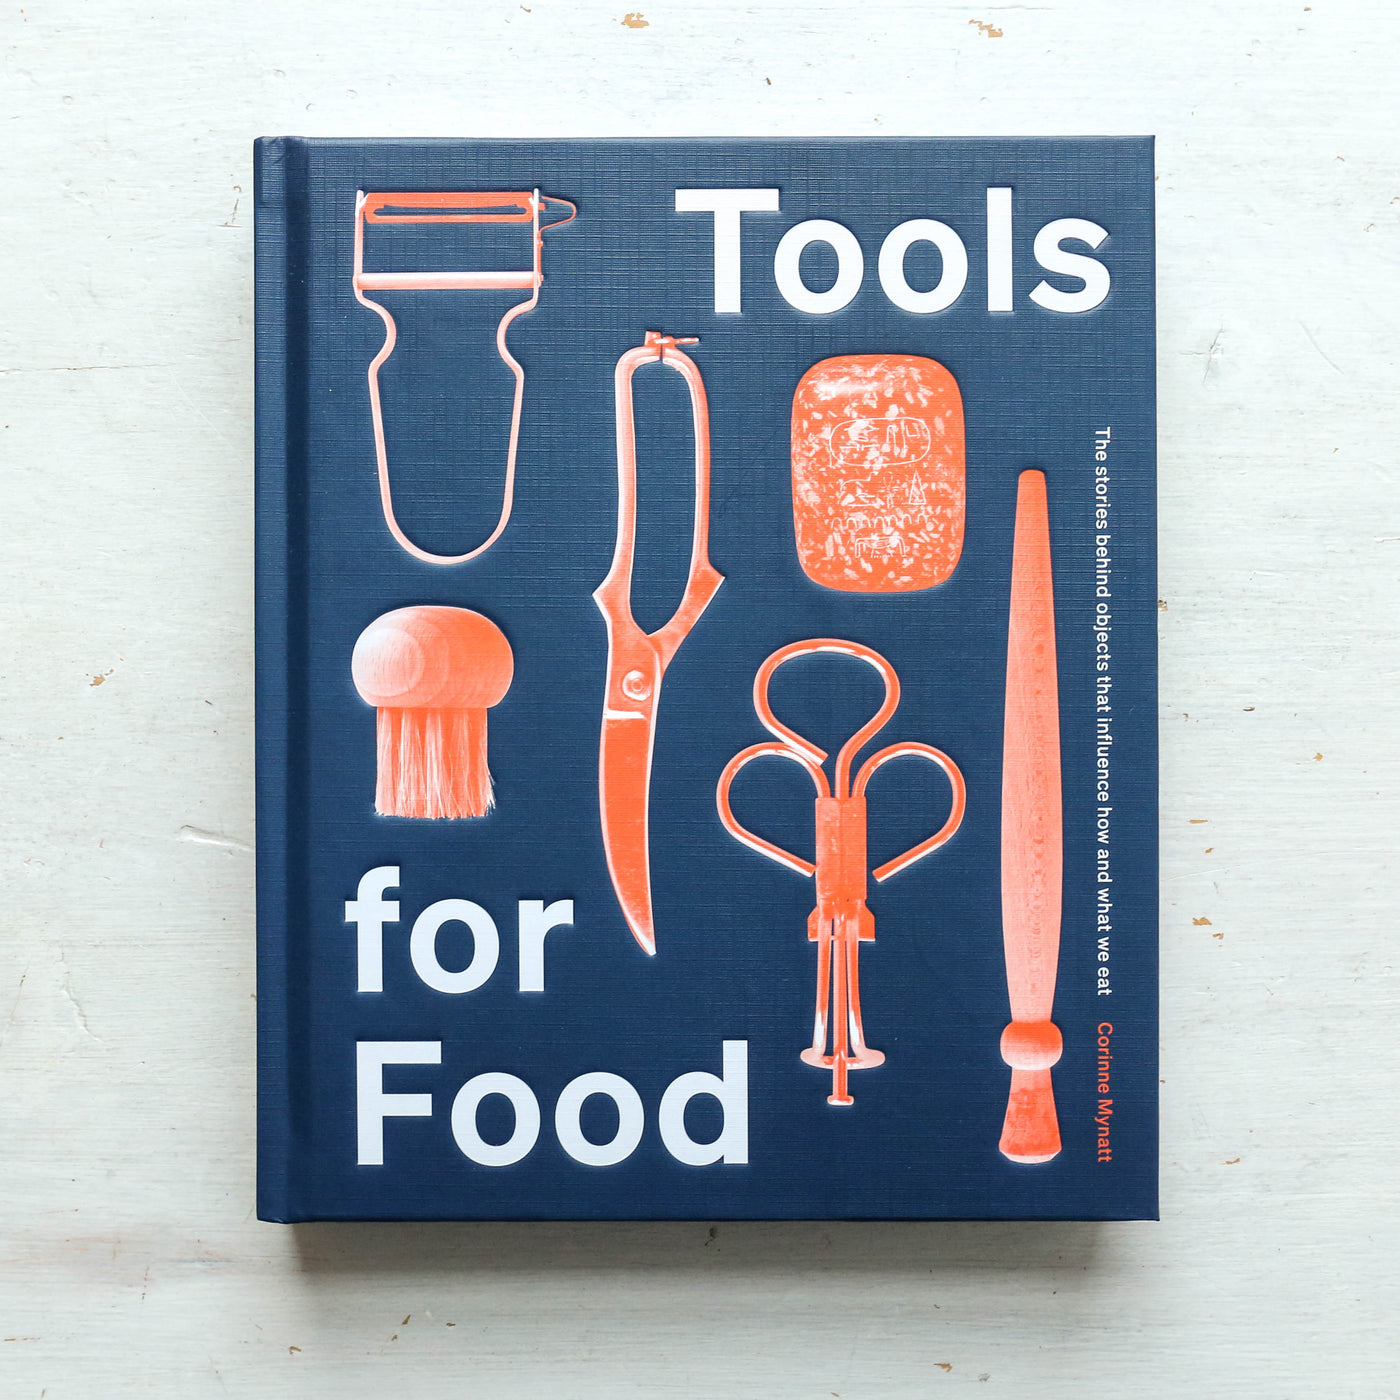 Tools for Food : The Objects that Influence How and What We Eat